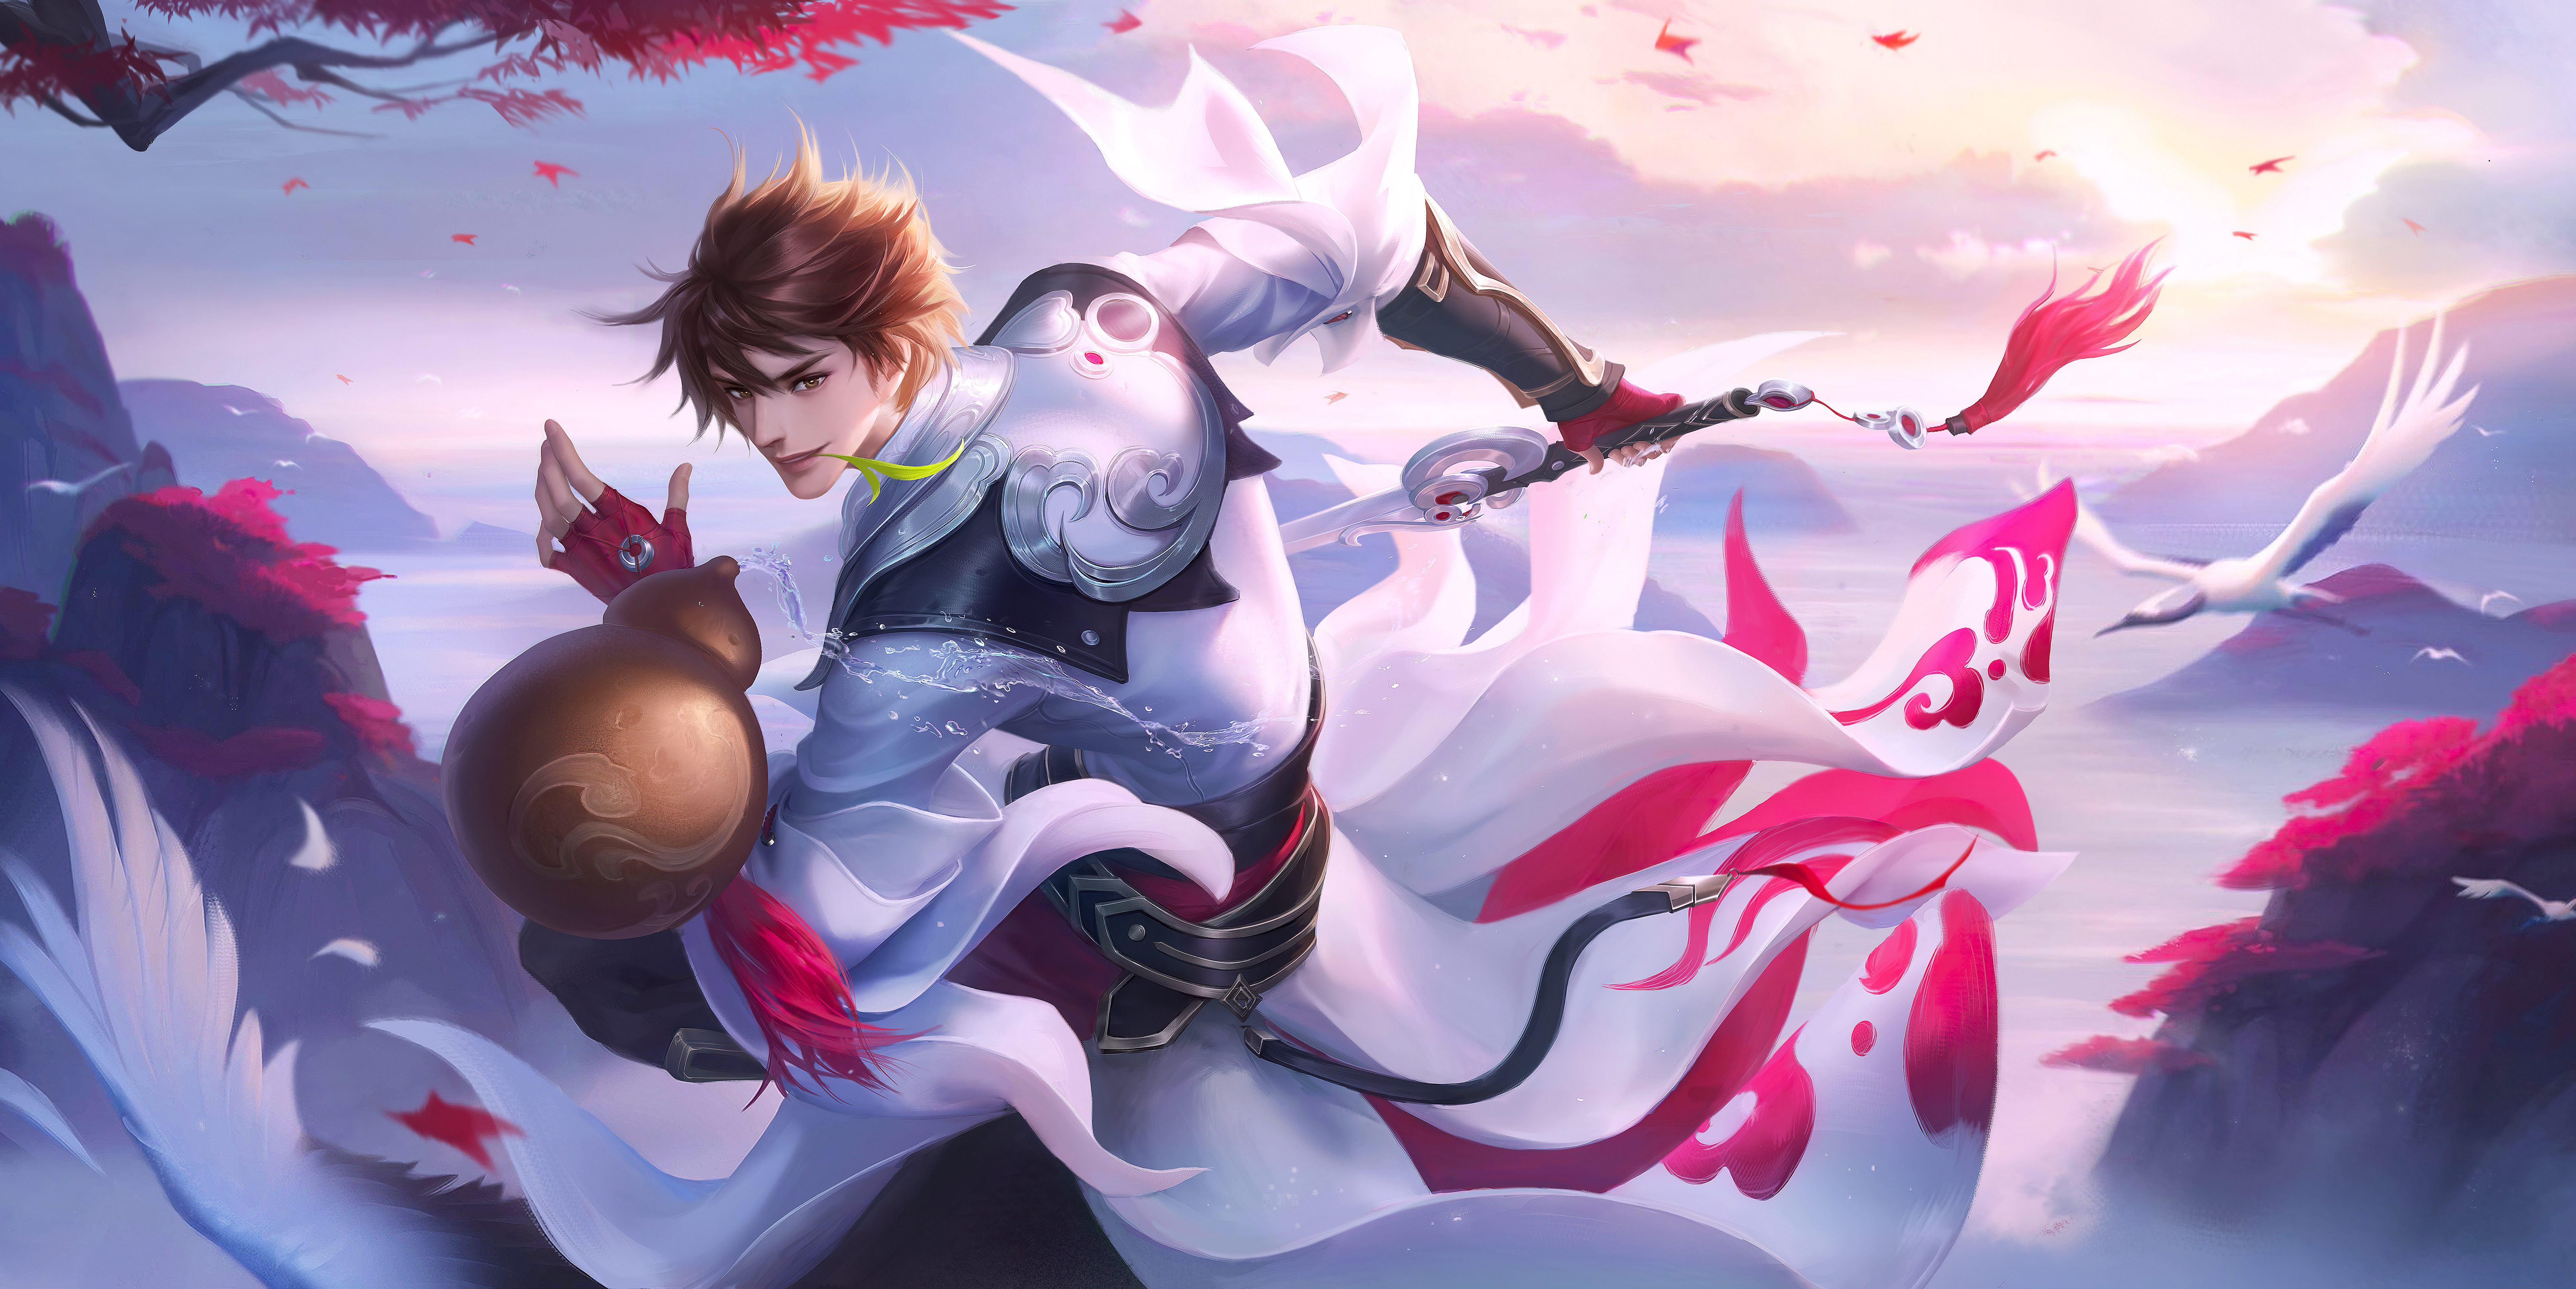 Honor Of Kings Game Characters Video Game Characters Fantasy Art Fantasy Men Video Games Anime Games 6397x3200